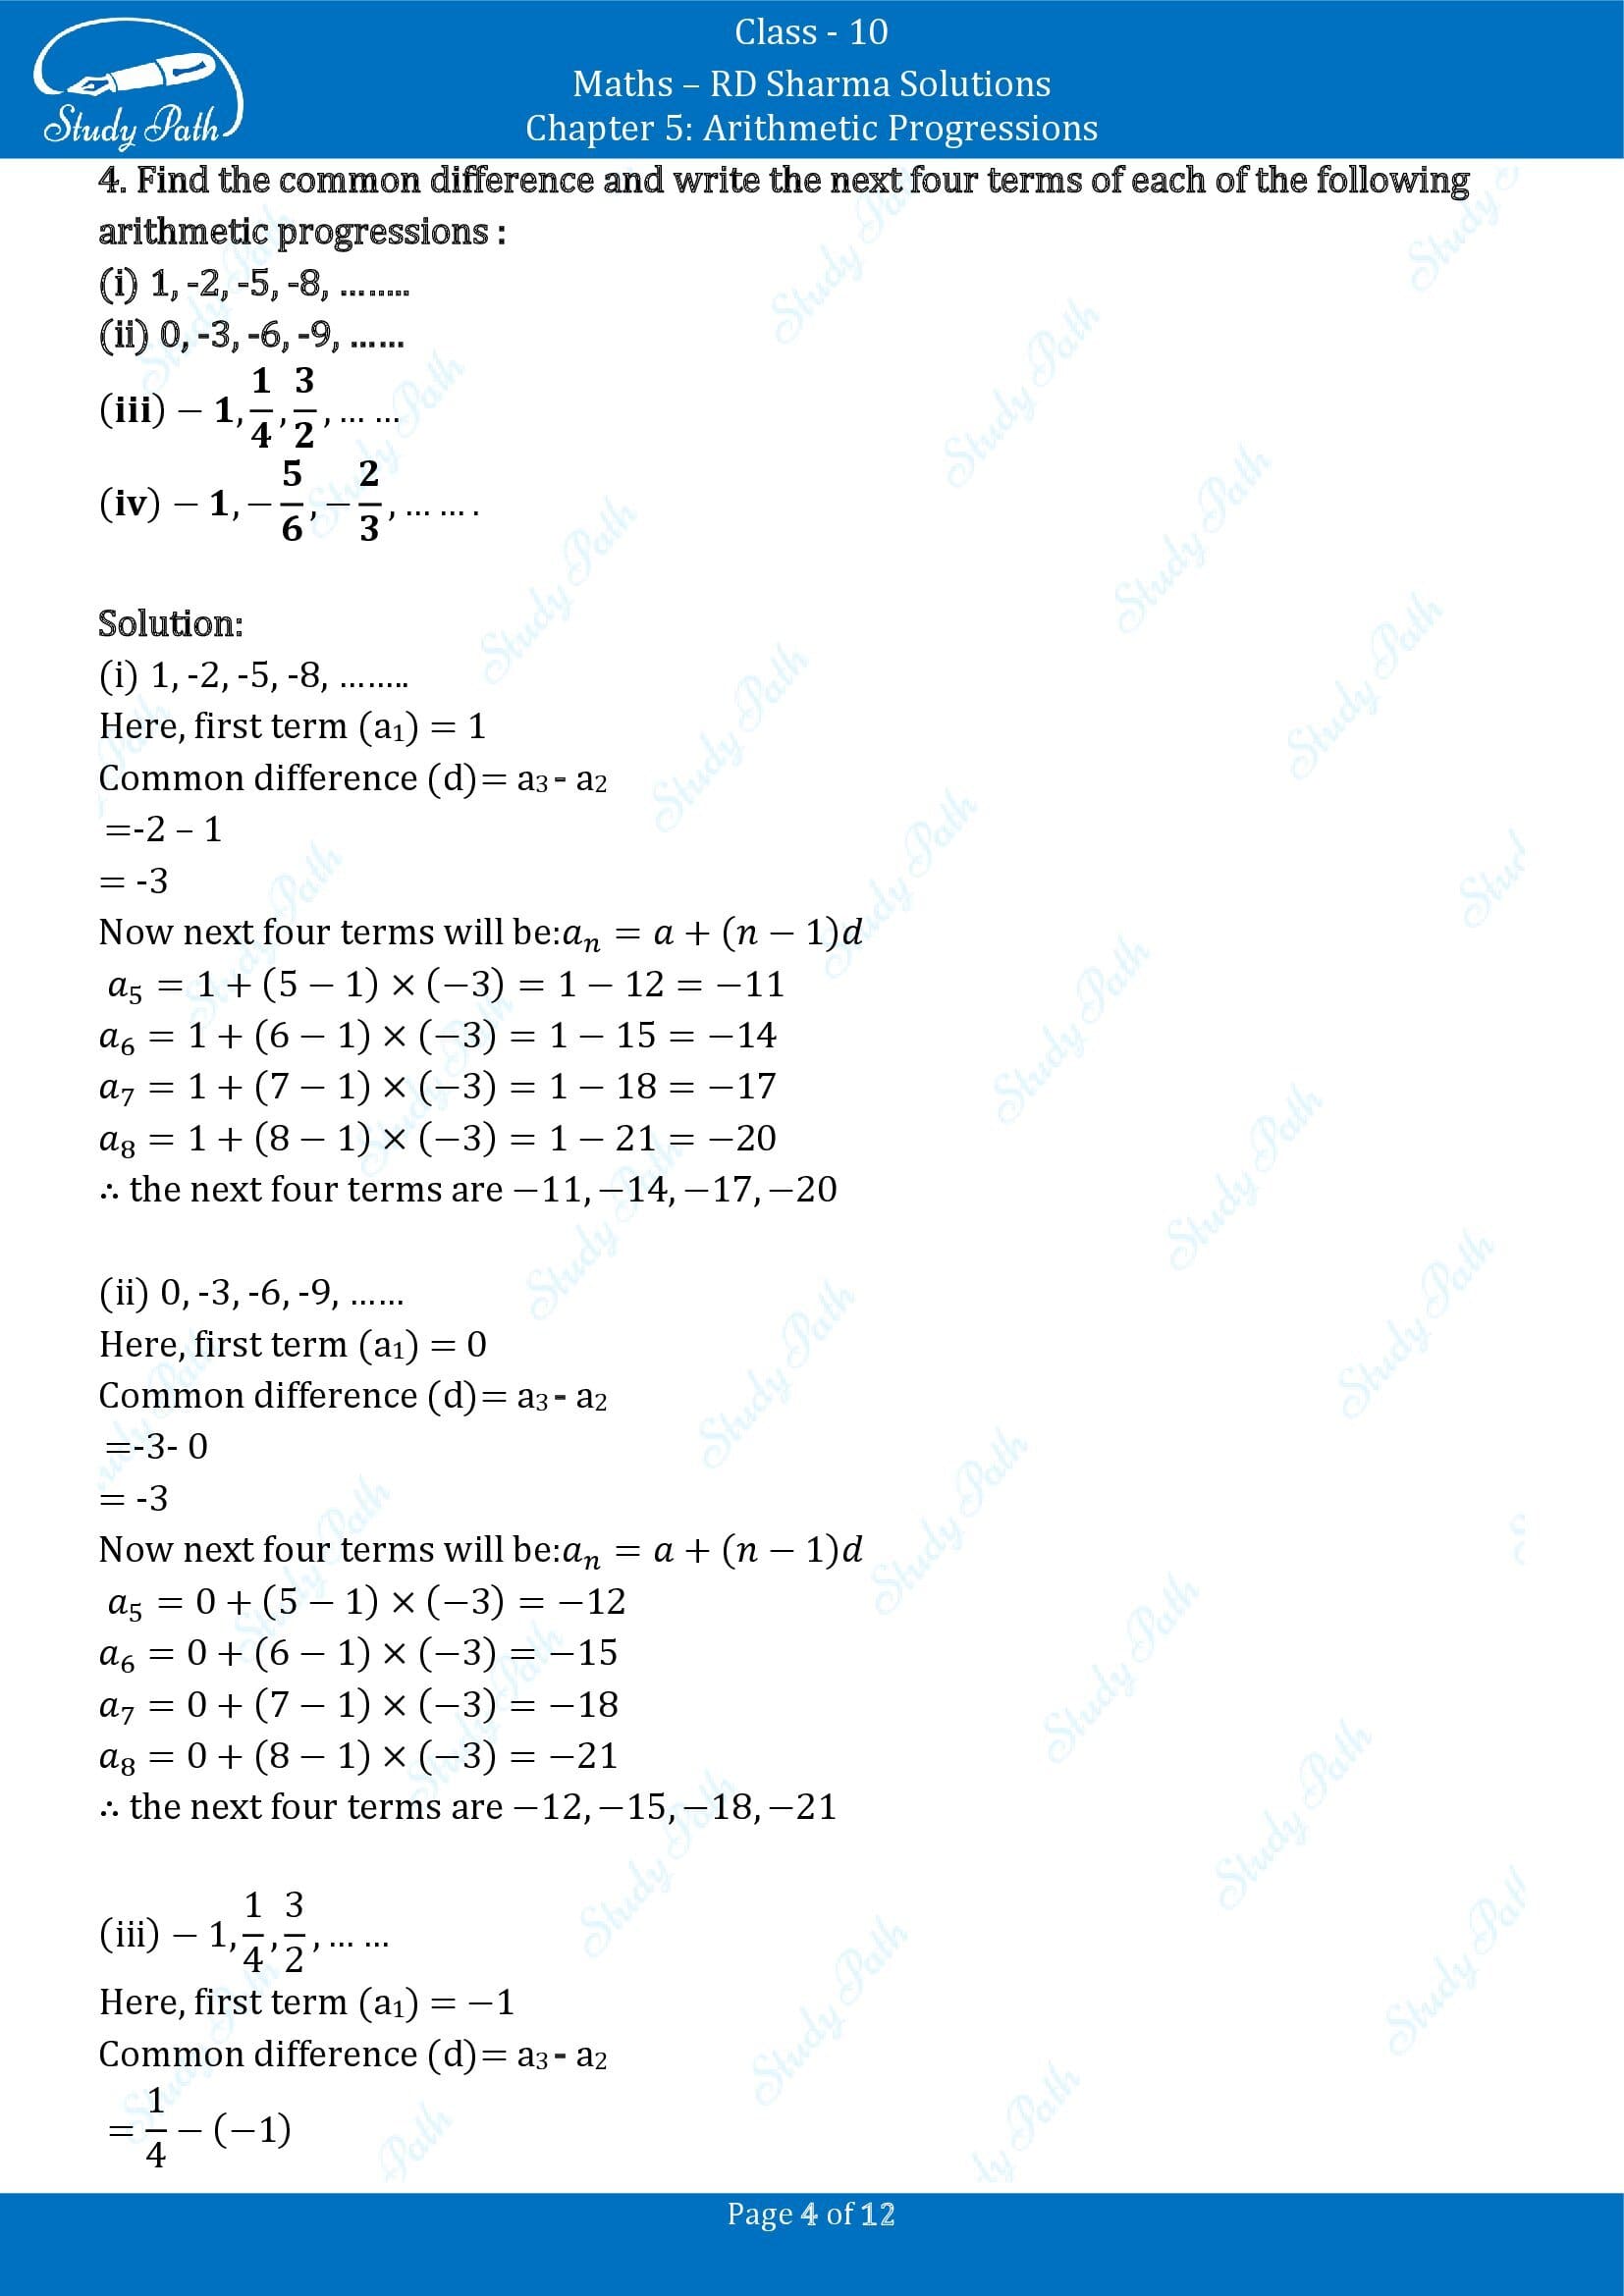 RD Sharma Solutions Class 10 Chapter 5 Arithmetic Progressions Exercise 5.3 00004